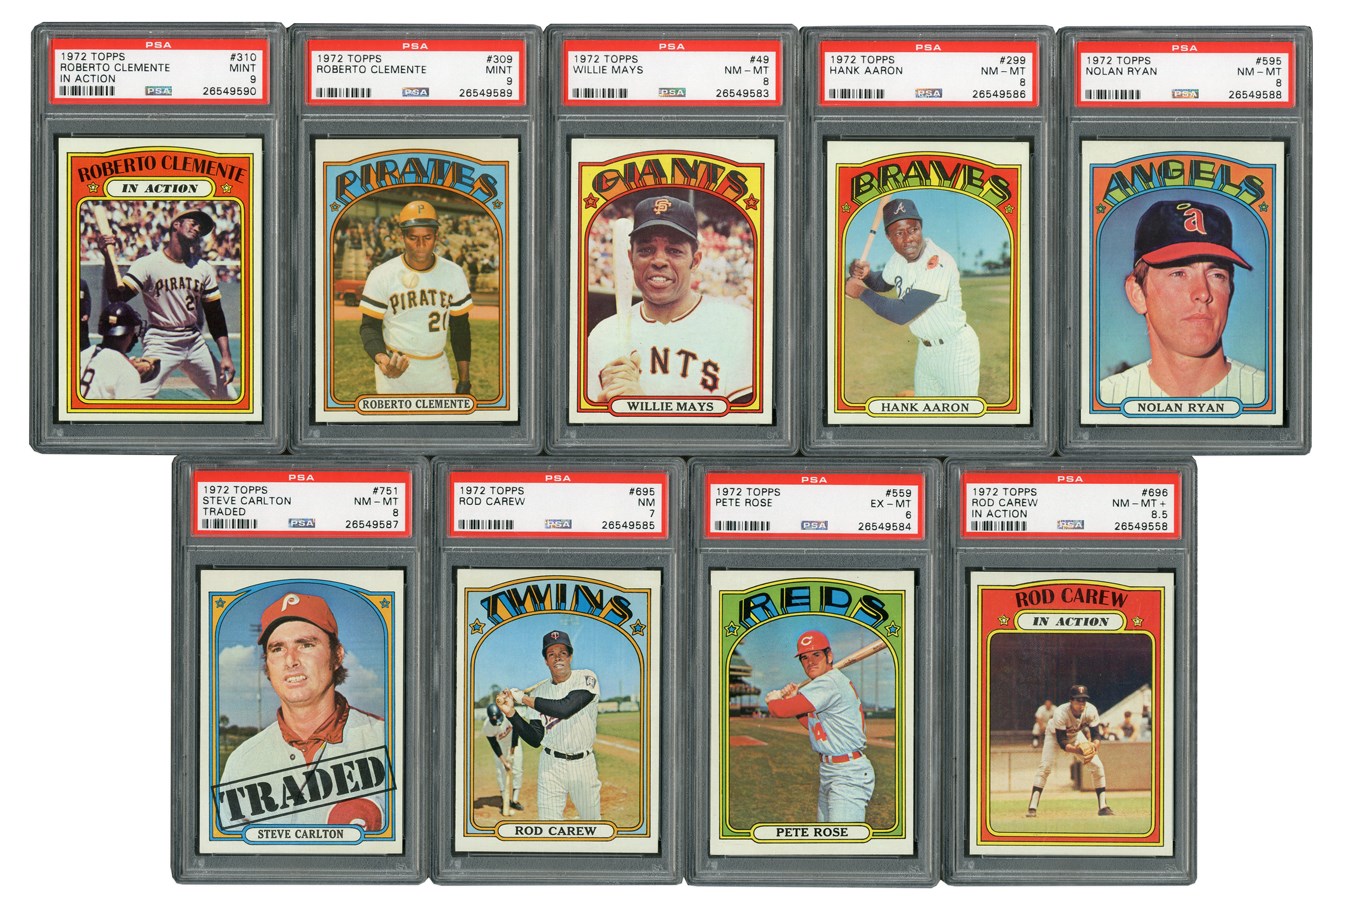 Baseball and Trading Cards - 1972 Topps High Grade Complete Set (787) with Two PSA MINT Clemente Cards!